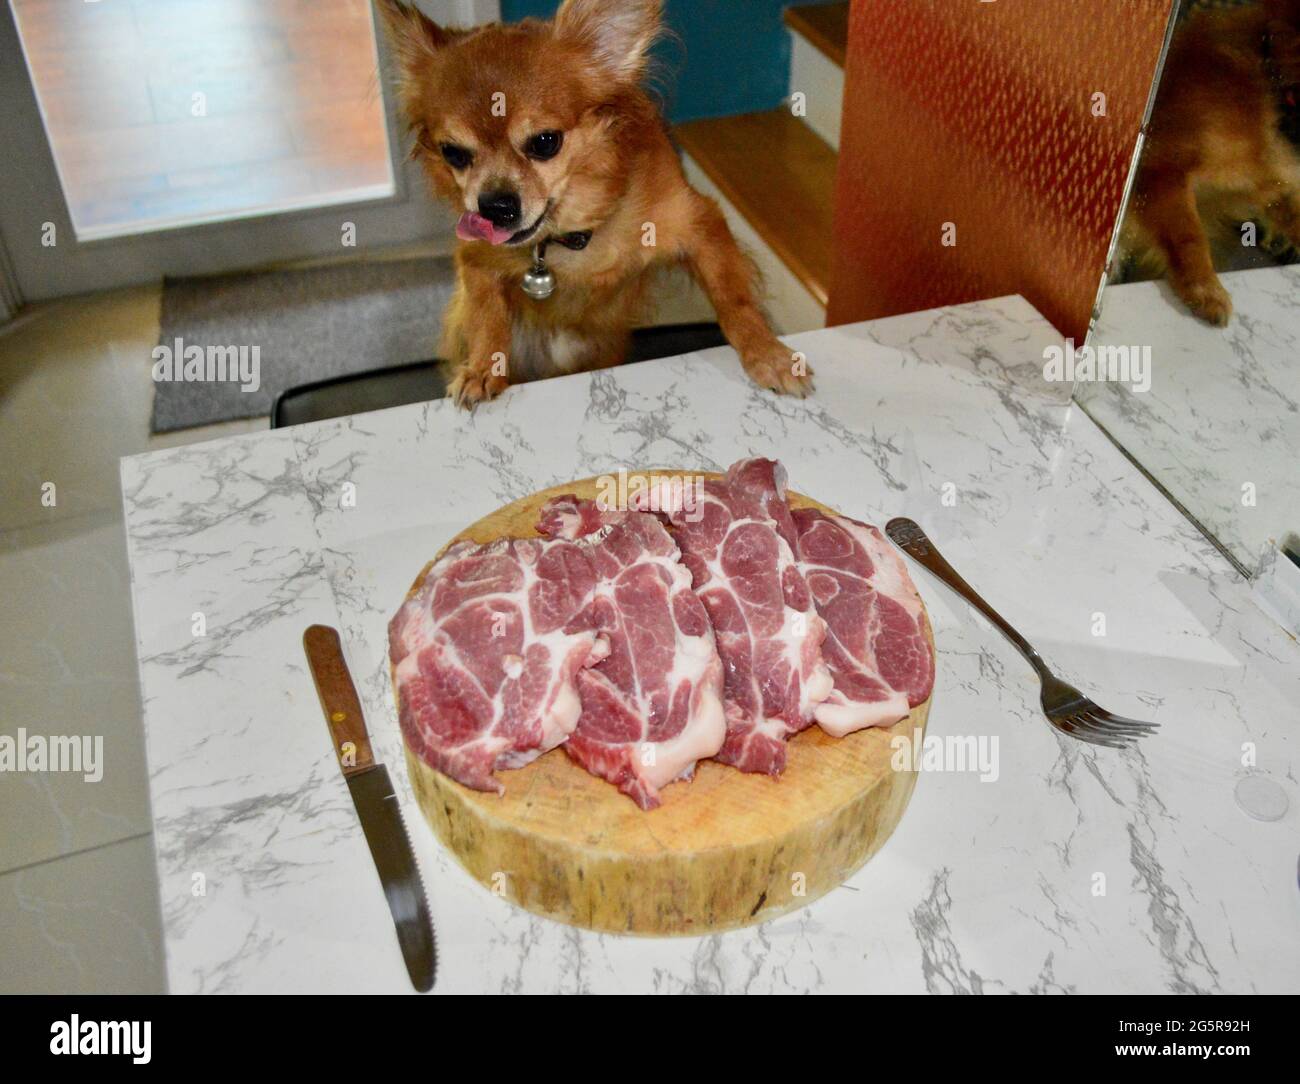 dog my good friend he want eat stake pork of my but i want cooking first Stock Photo